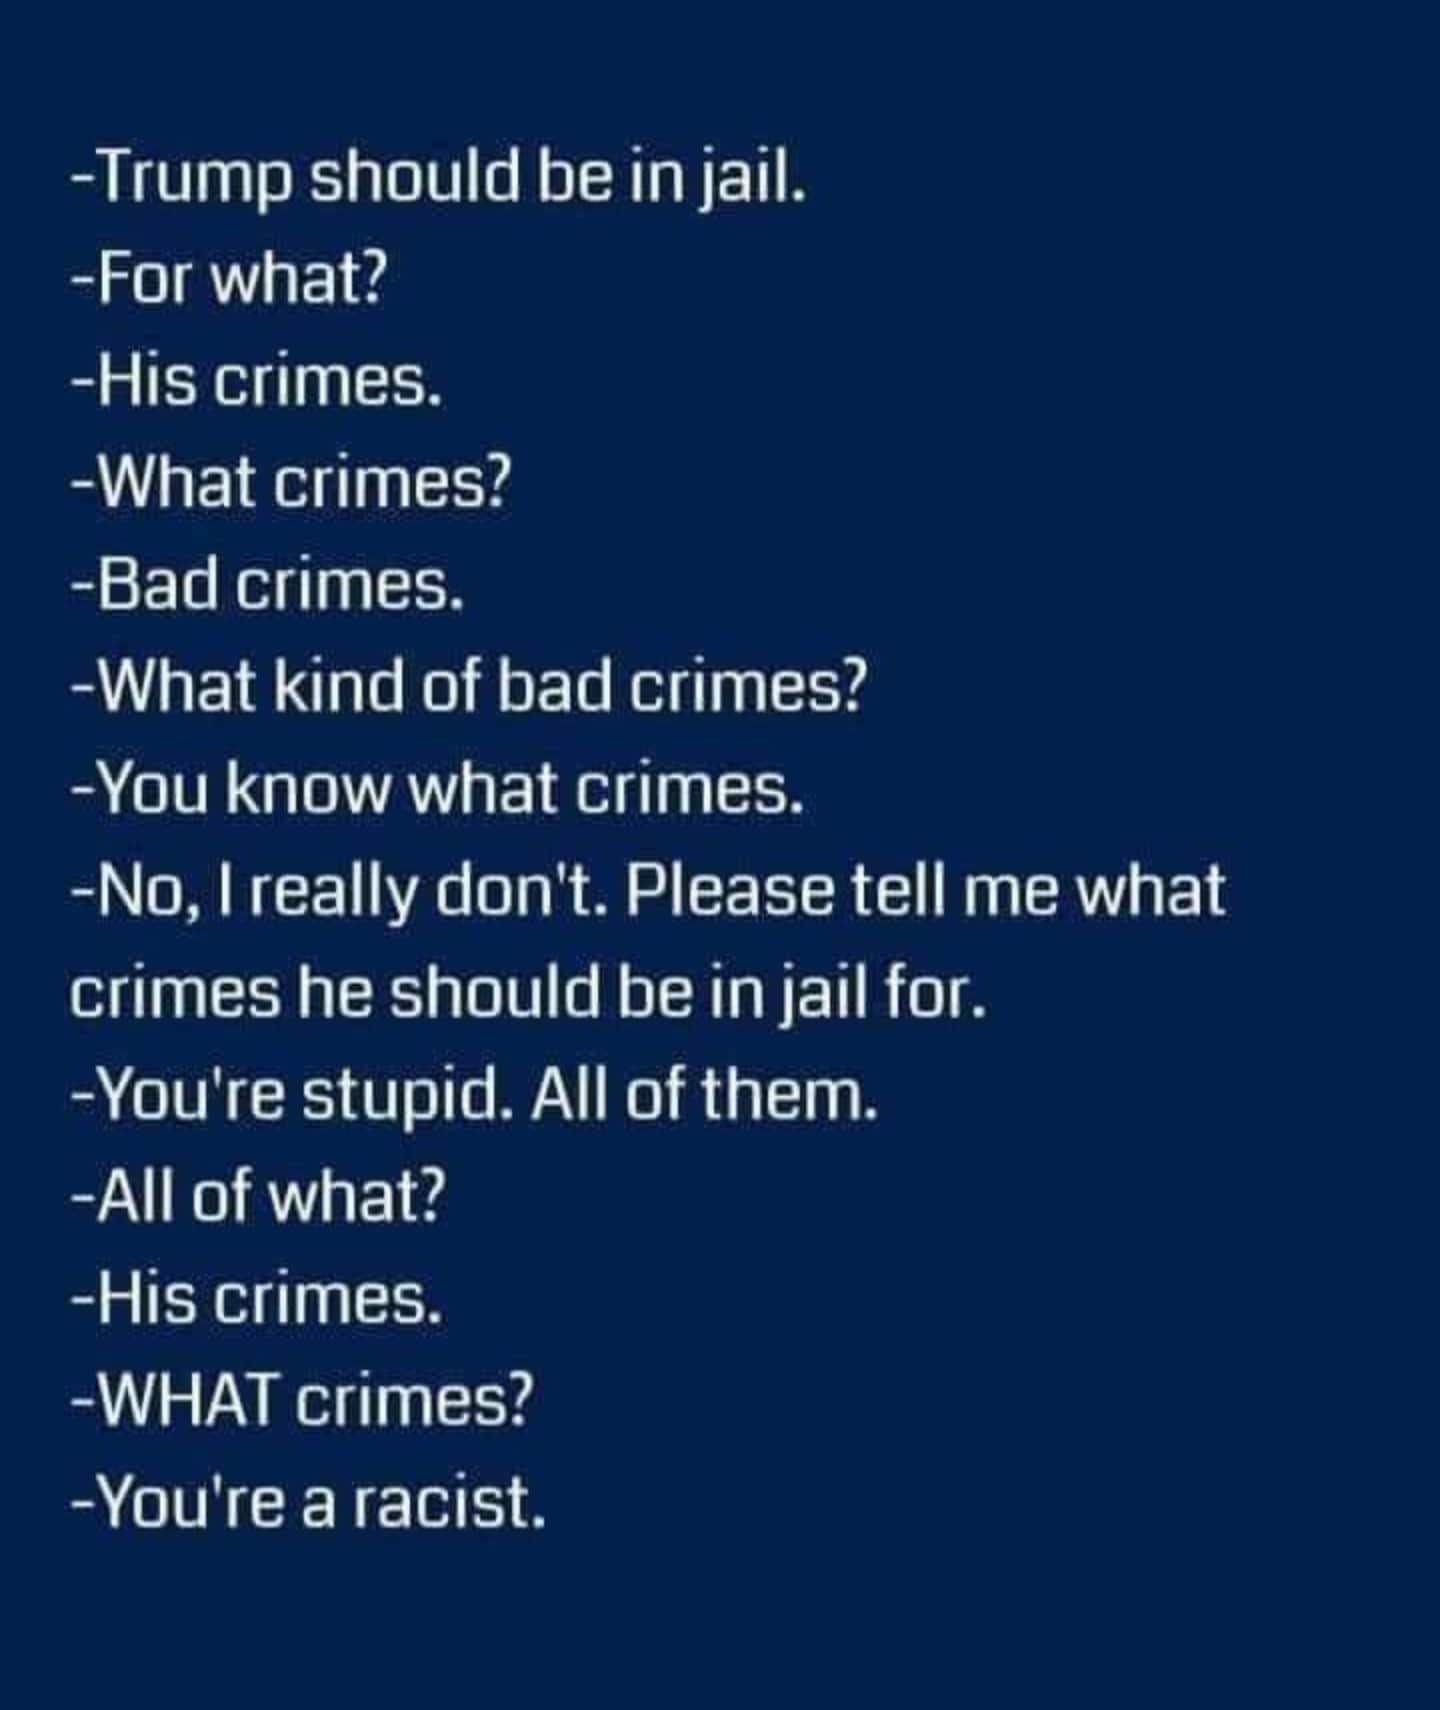 political political-memes political text: -Trump should be in jail. -For what? -His crimes. -What crimes? -Bad crimes. -What kind of bad crimes? -You know what crimes. -No, I really don't. Please tell me what crimes he should be in jail for. -You're stupid. All of them. -All of what? -His crimes. -WHAT crimes? -You're a racist. 